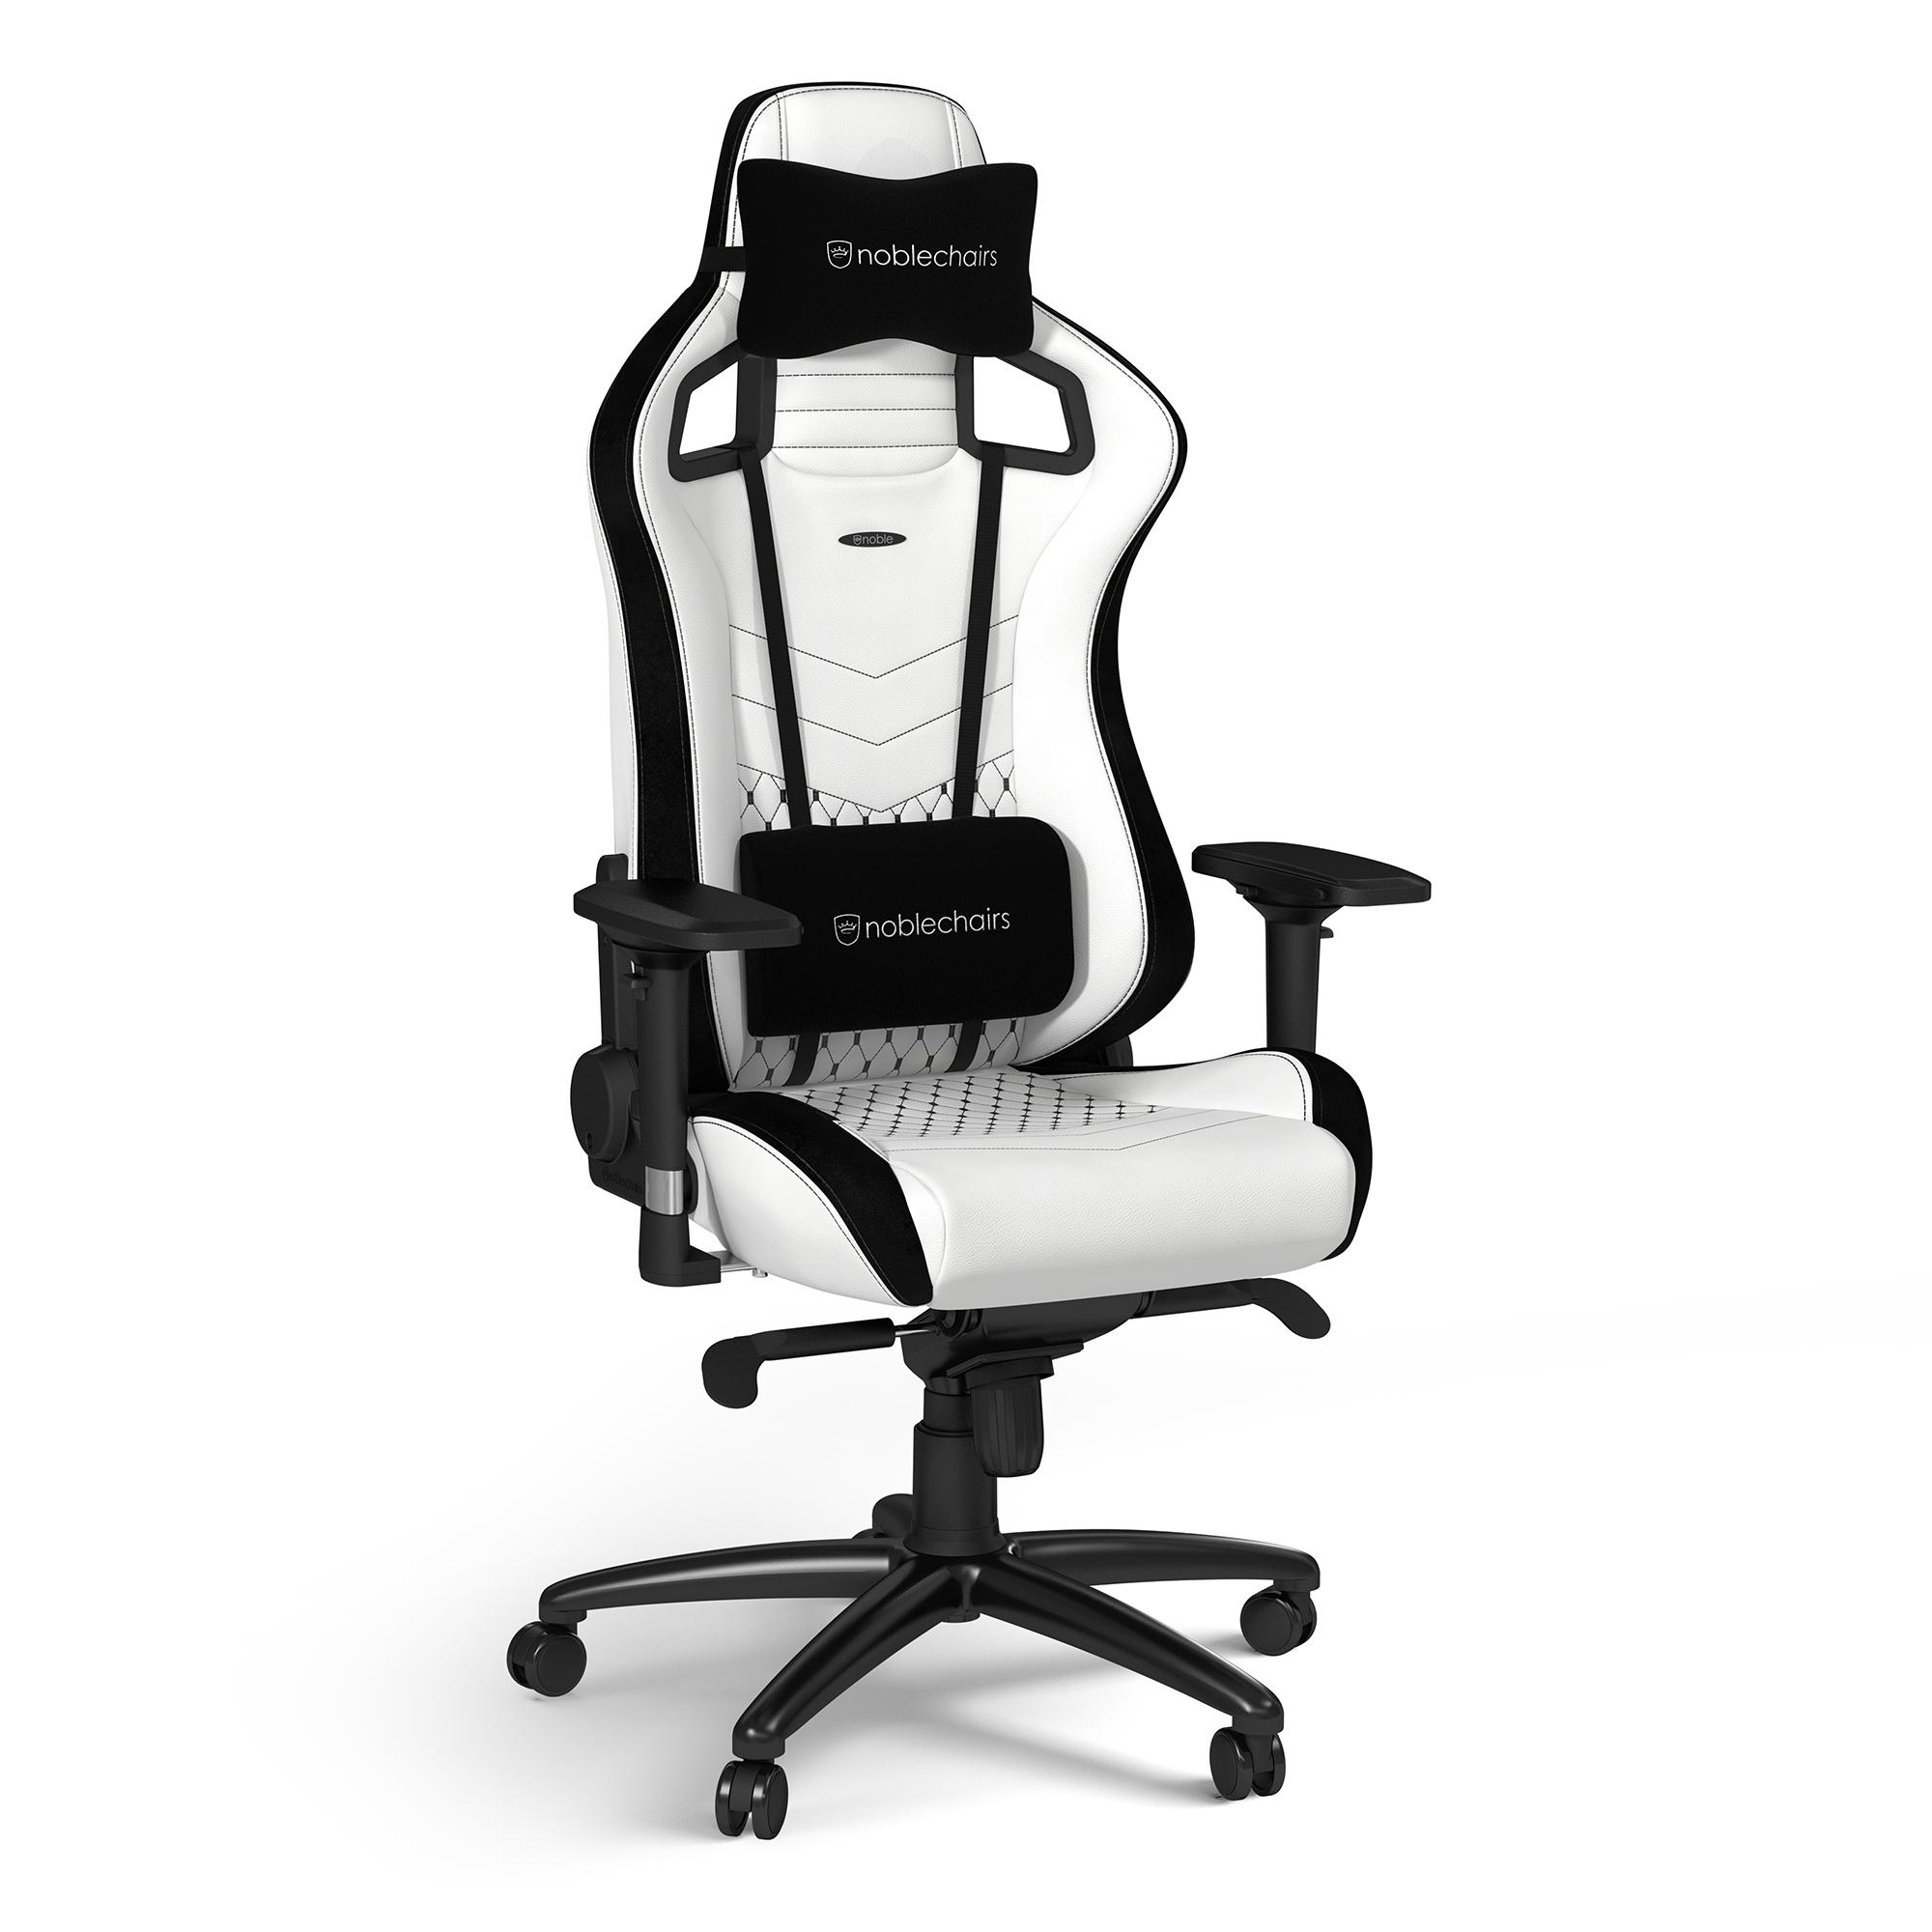 noblechairs EPIC Gaming Chair - White/Black